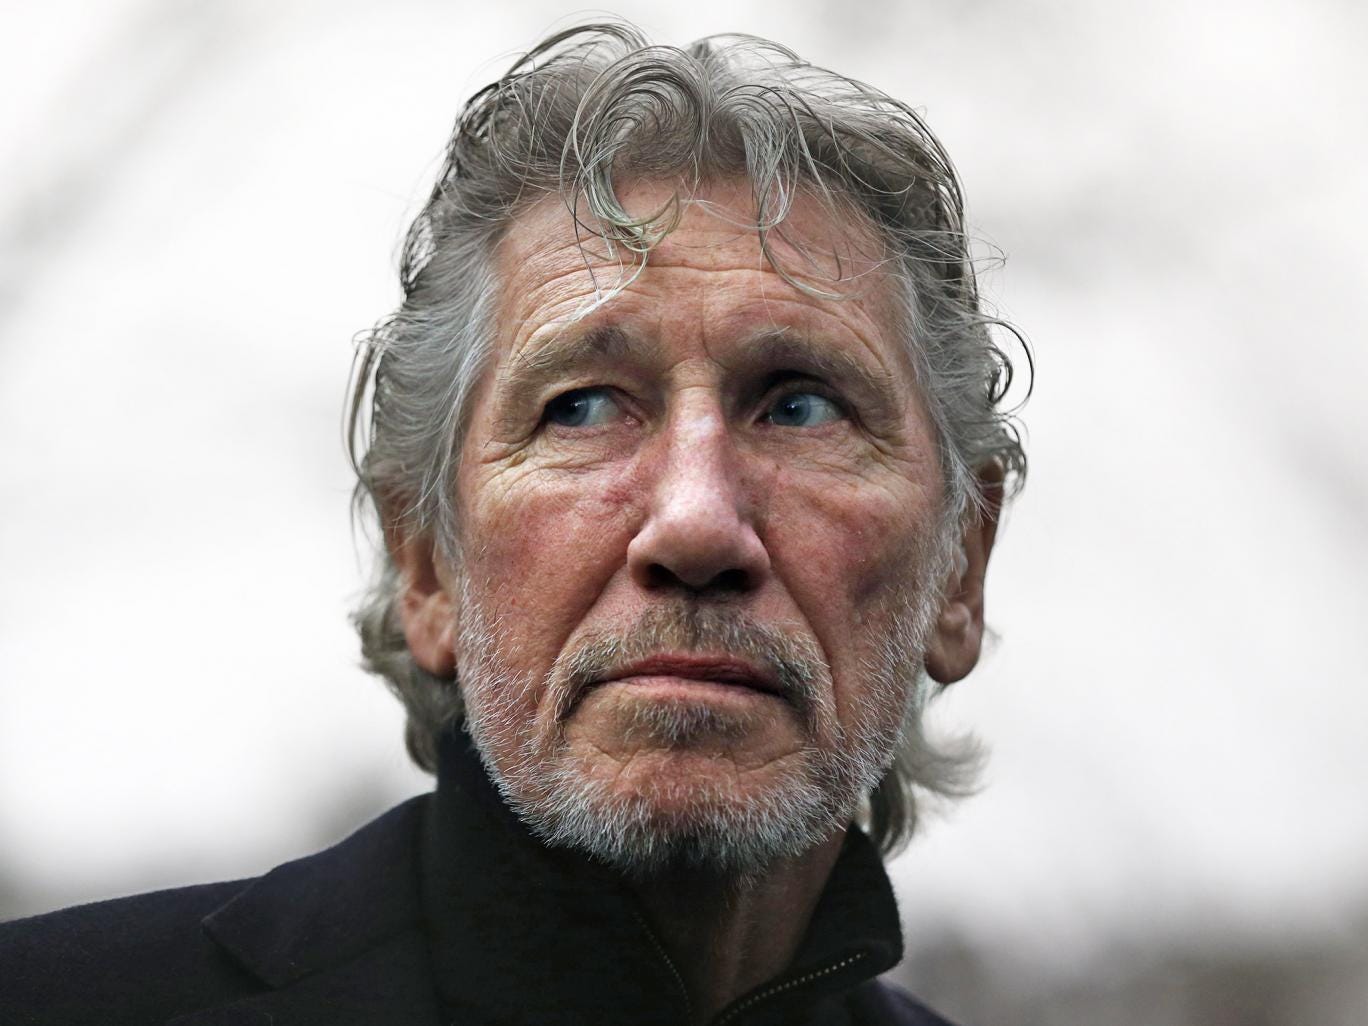 http://static.independent.co.uk/s3fs-public/styles/story_large/public/thumbnails/image/2016/02/19/20/pg-12-roger-waters-2-getty.jpg